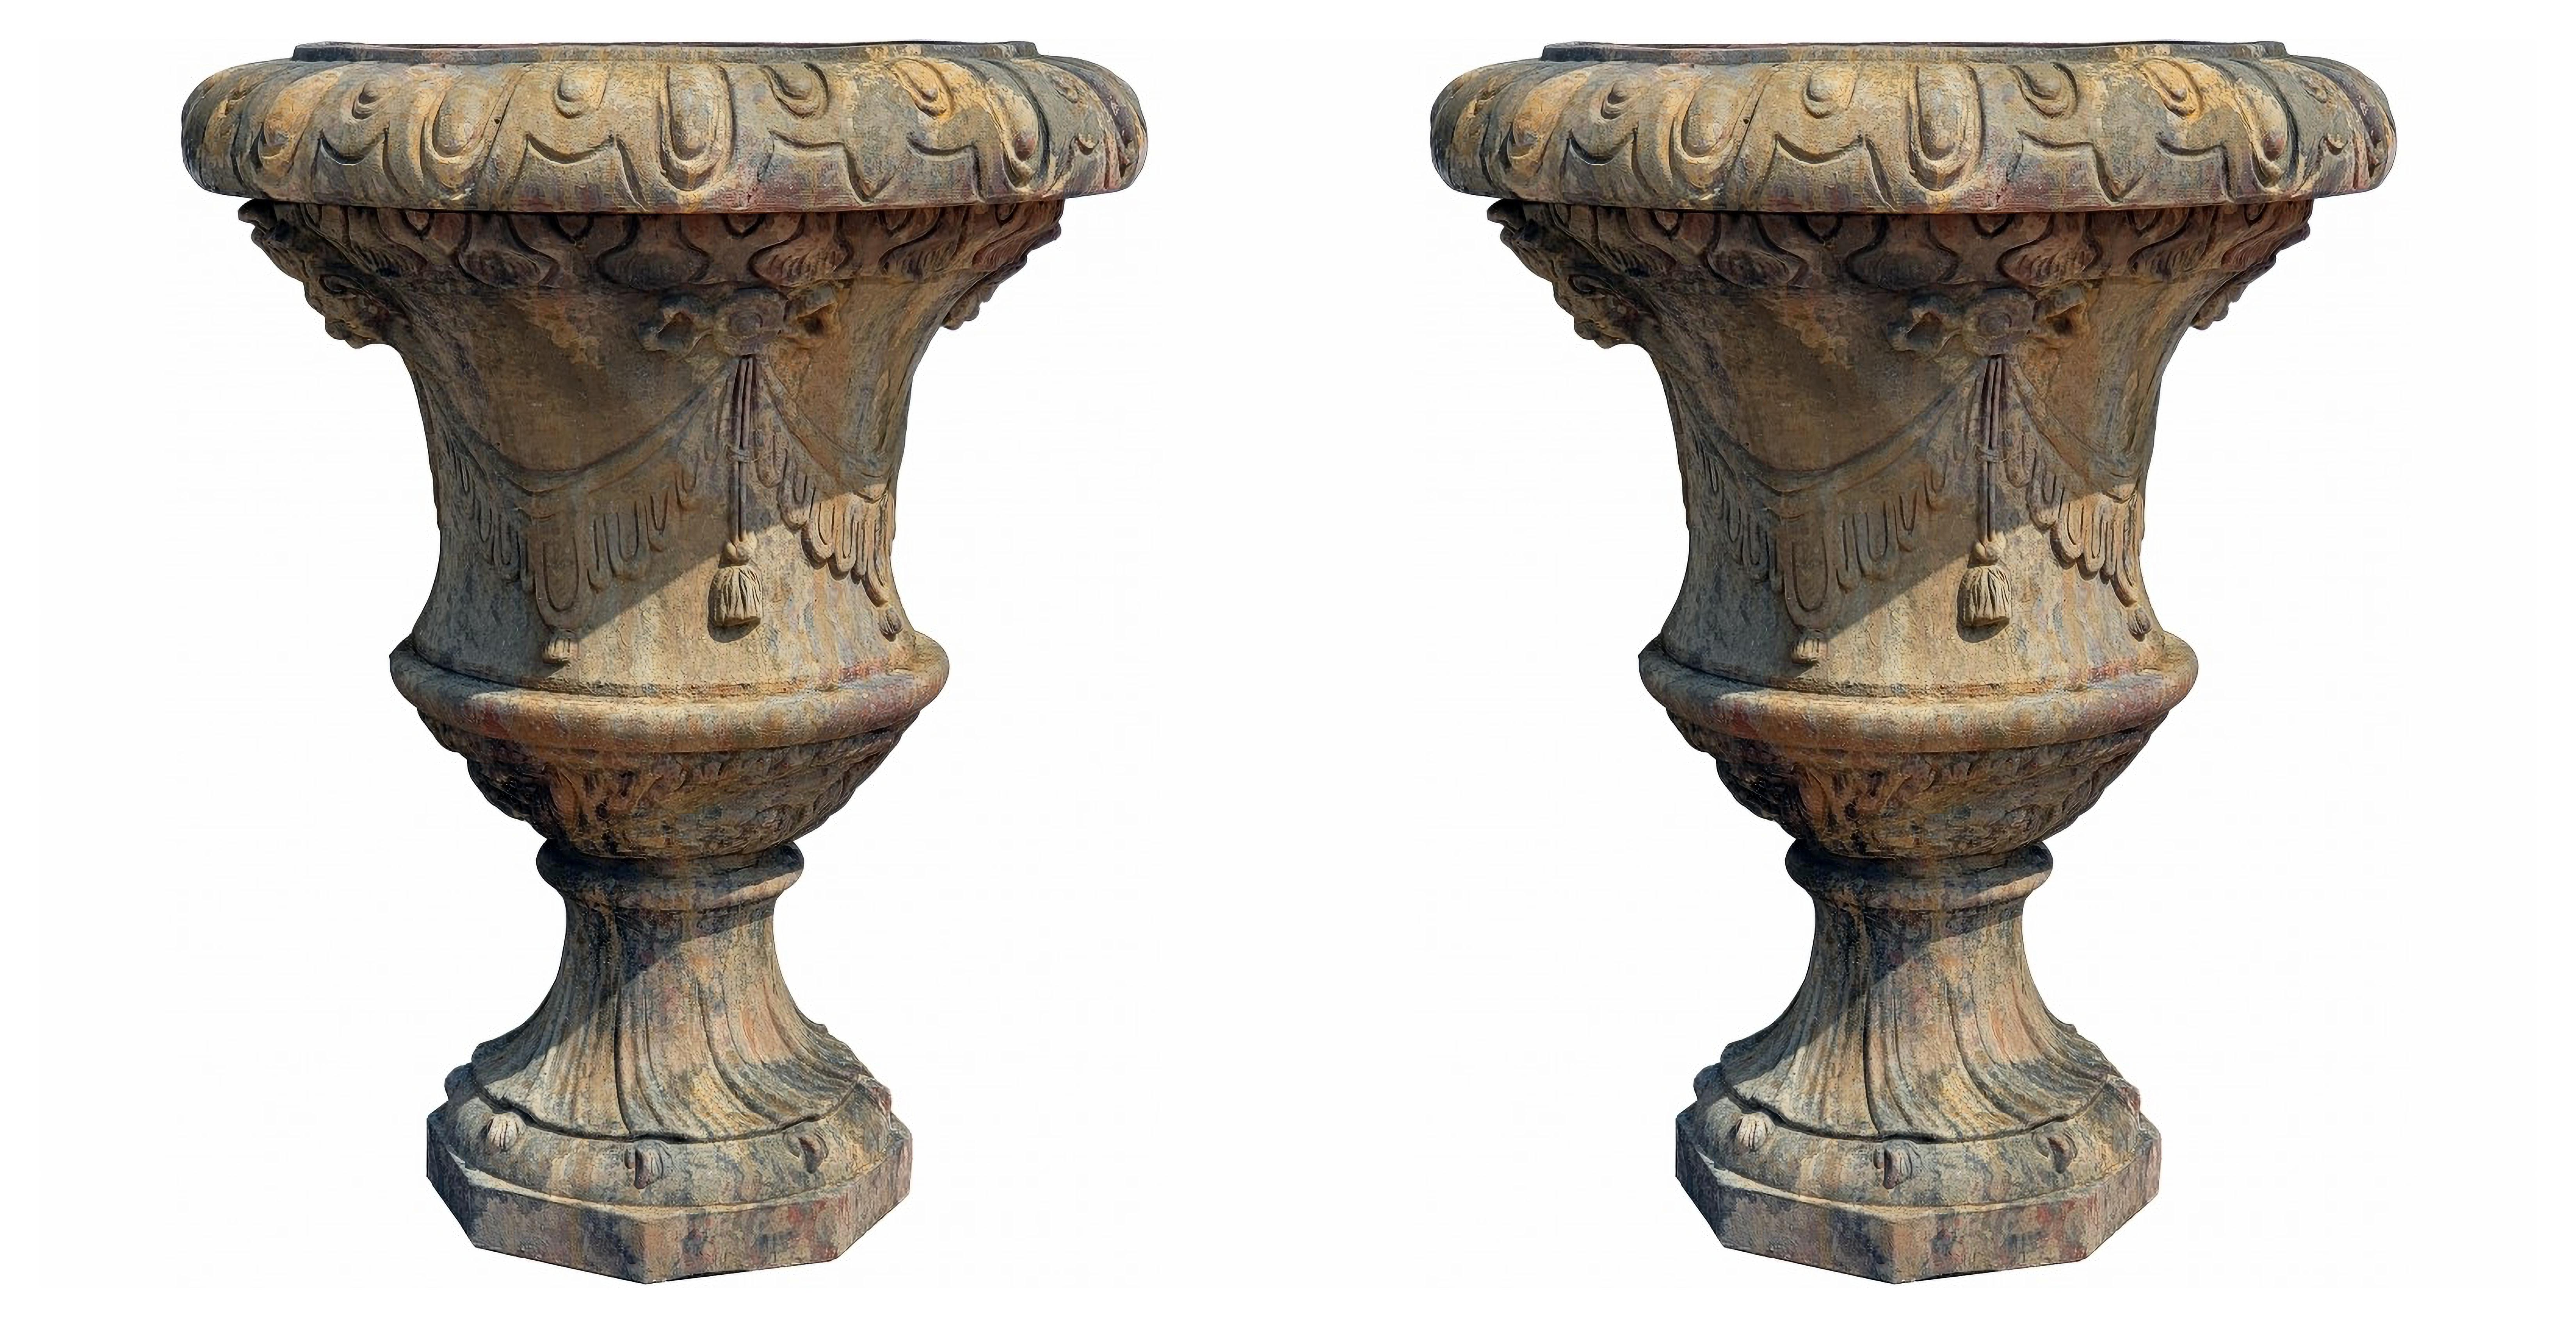 PAIR OF LARGE FLORENTINE ORNAMENTAL VASES IN IMPRUNETA TERRACOTTA end 19th Century

HEIGHT 105cm
WIDTH 85cms
WEIGHT 54 Kg
OCTAGONAL BASE Ø 44 cm
EXTERNAL MOUTH DIAMETER 85 cm
INTERNAL MOUTH DIAMETER 59 cm
MANUFACTURE Tuscany
MATERIAL